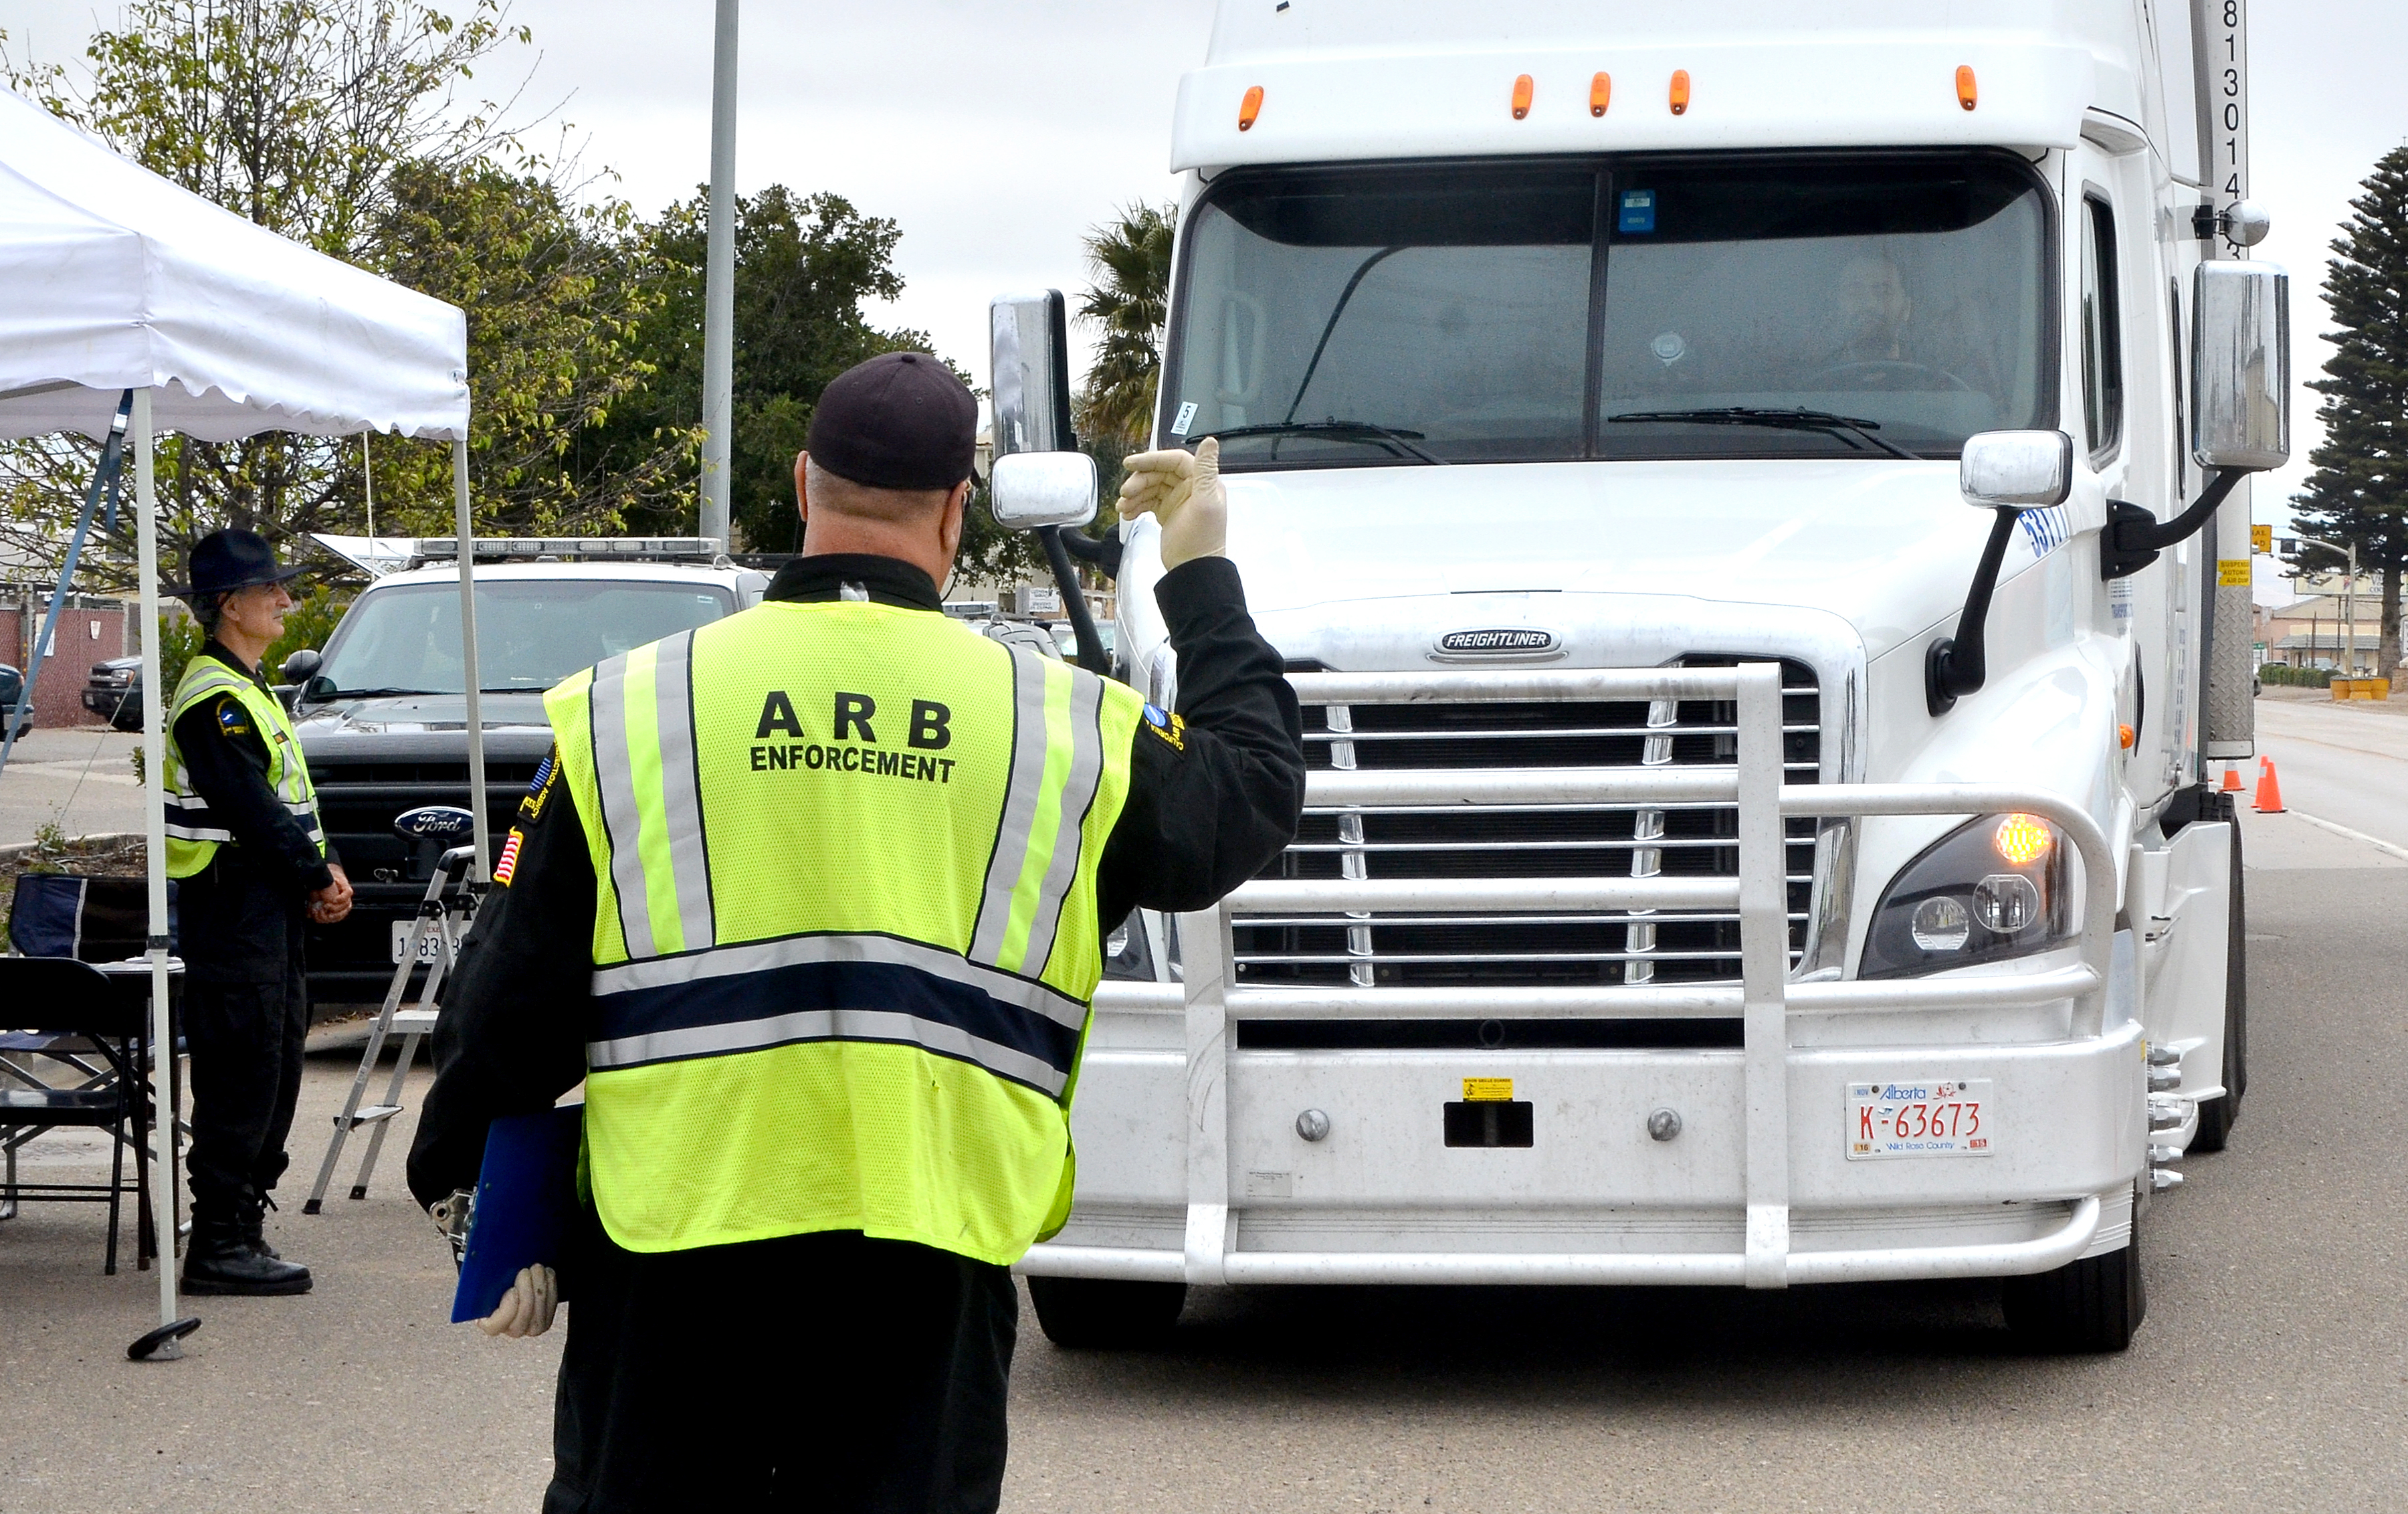 ARB official in front of a truck